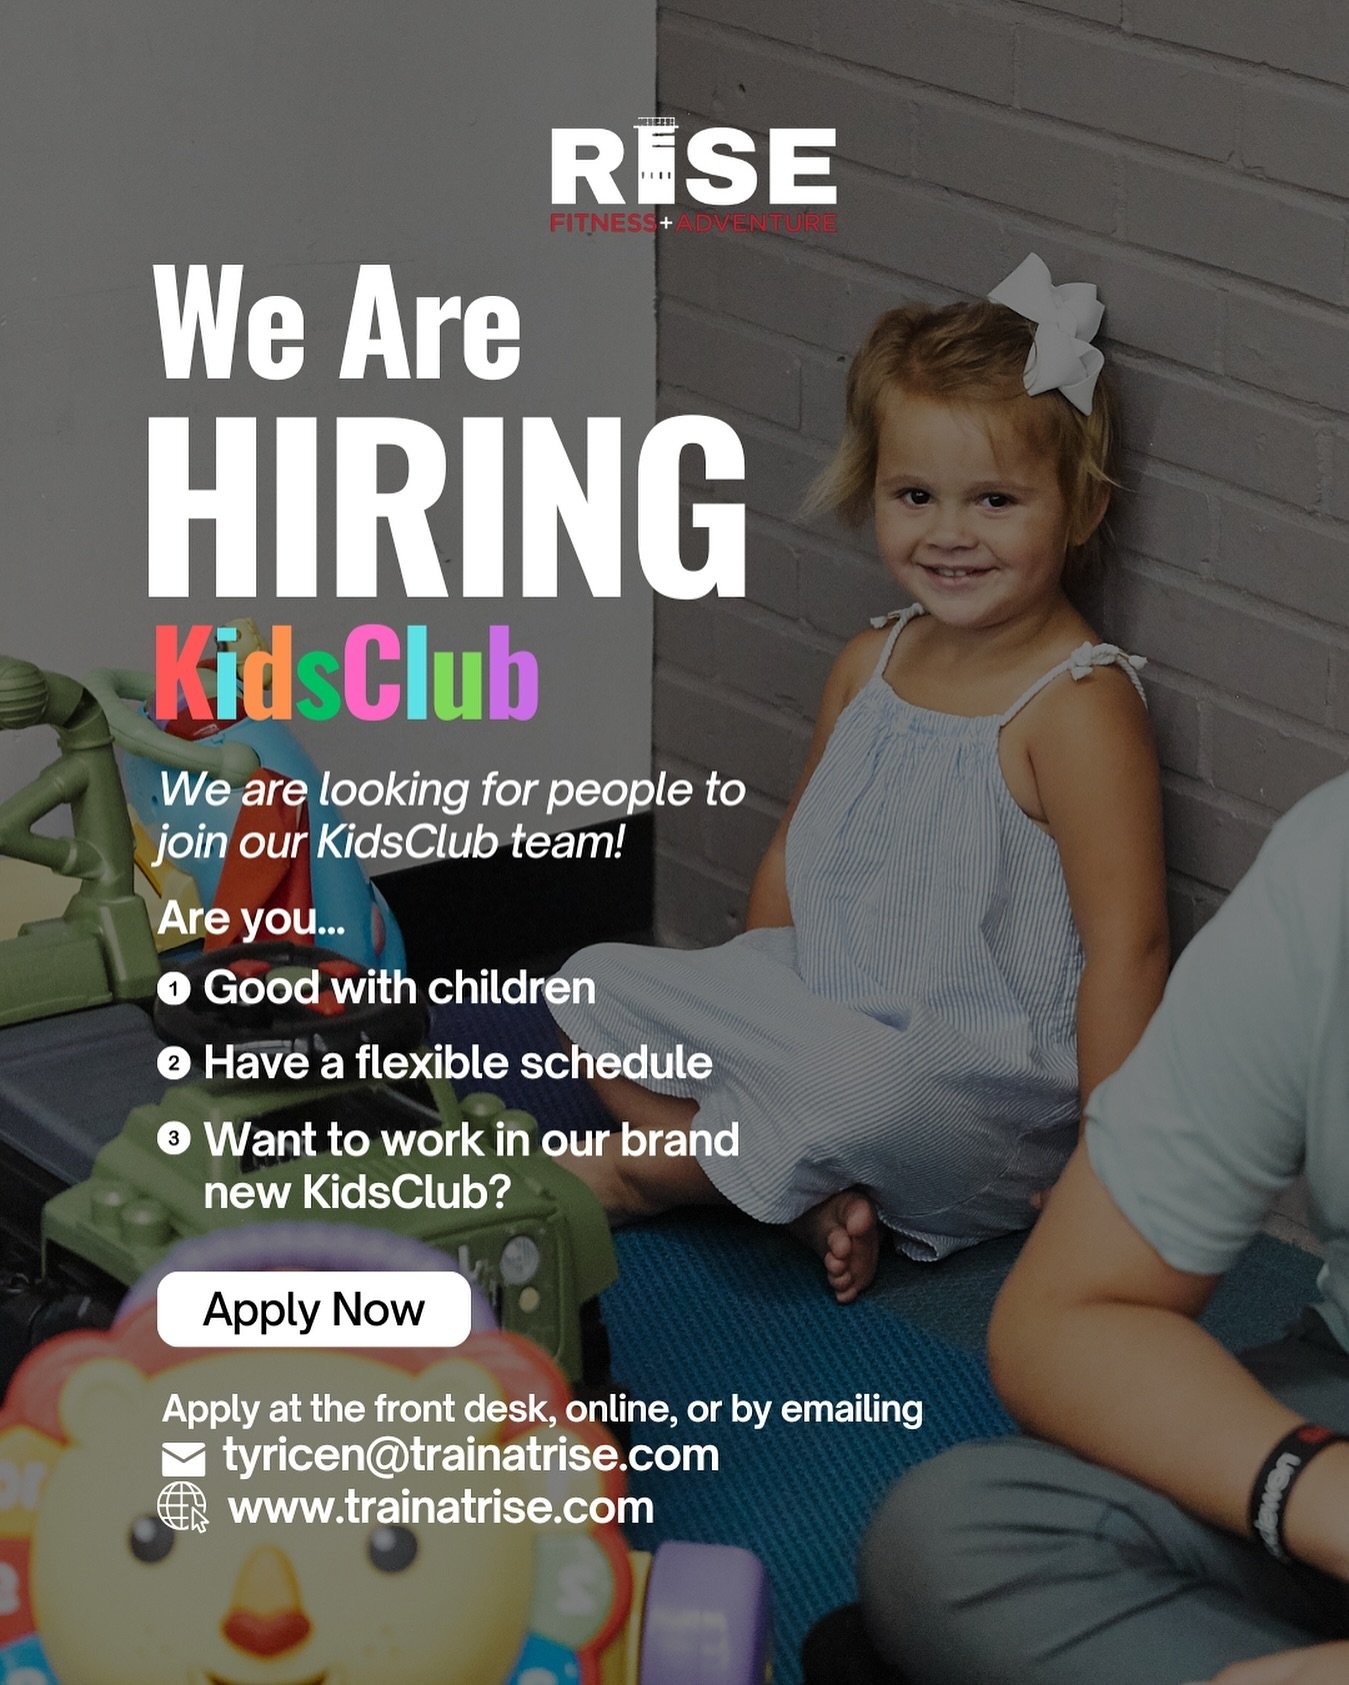 🖍️ We are HIRING KidsClub employees! 🧸

Are you looking for a flexible position, working with superstar kids in a brand new KidsClub, all while staying in the top gym environment in the state? 

⭐️ Join our KidsClub team! ⭐️

We offer flexible sche